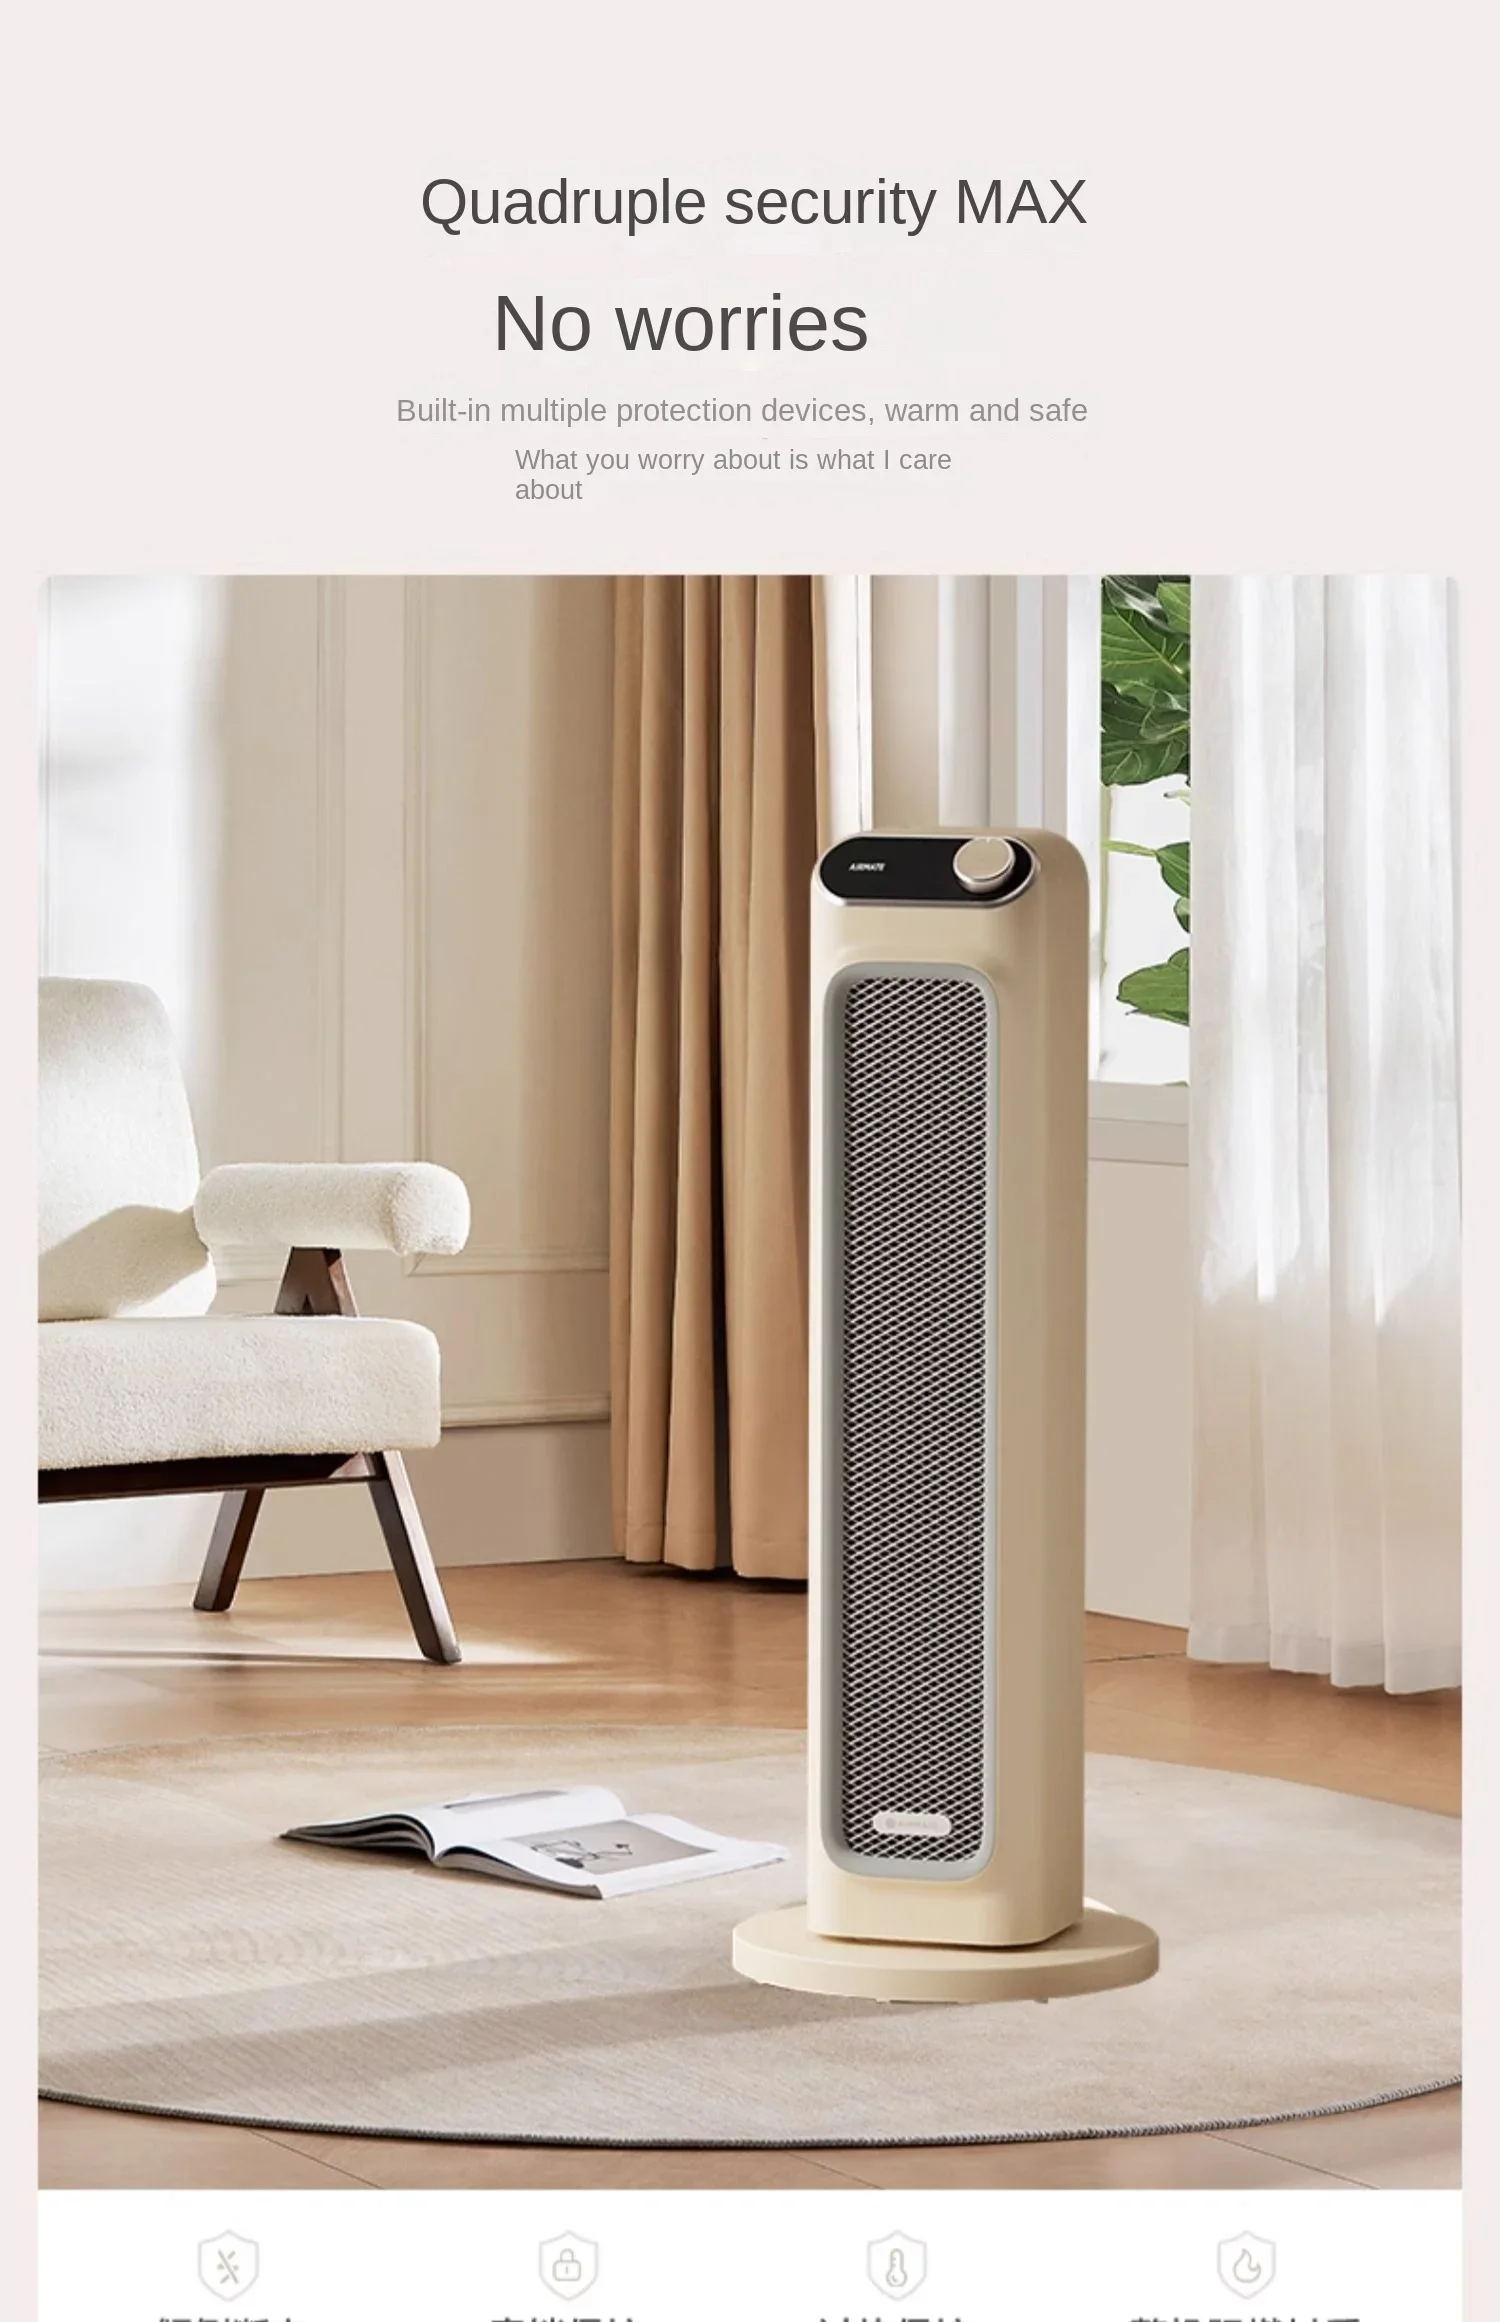 

220V AMITAYUS Electric Heater: Graphene Heating, Energy-Saving and Efficient, Indoor Portable Heater